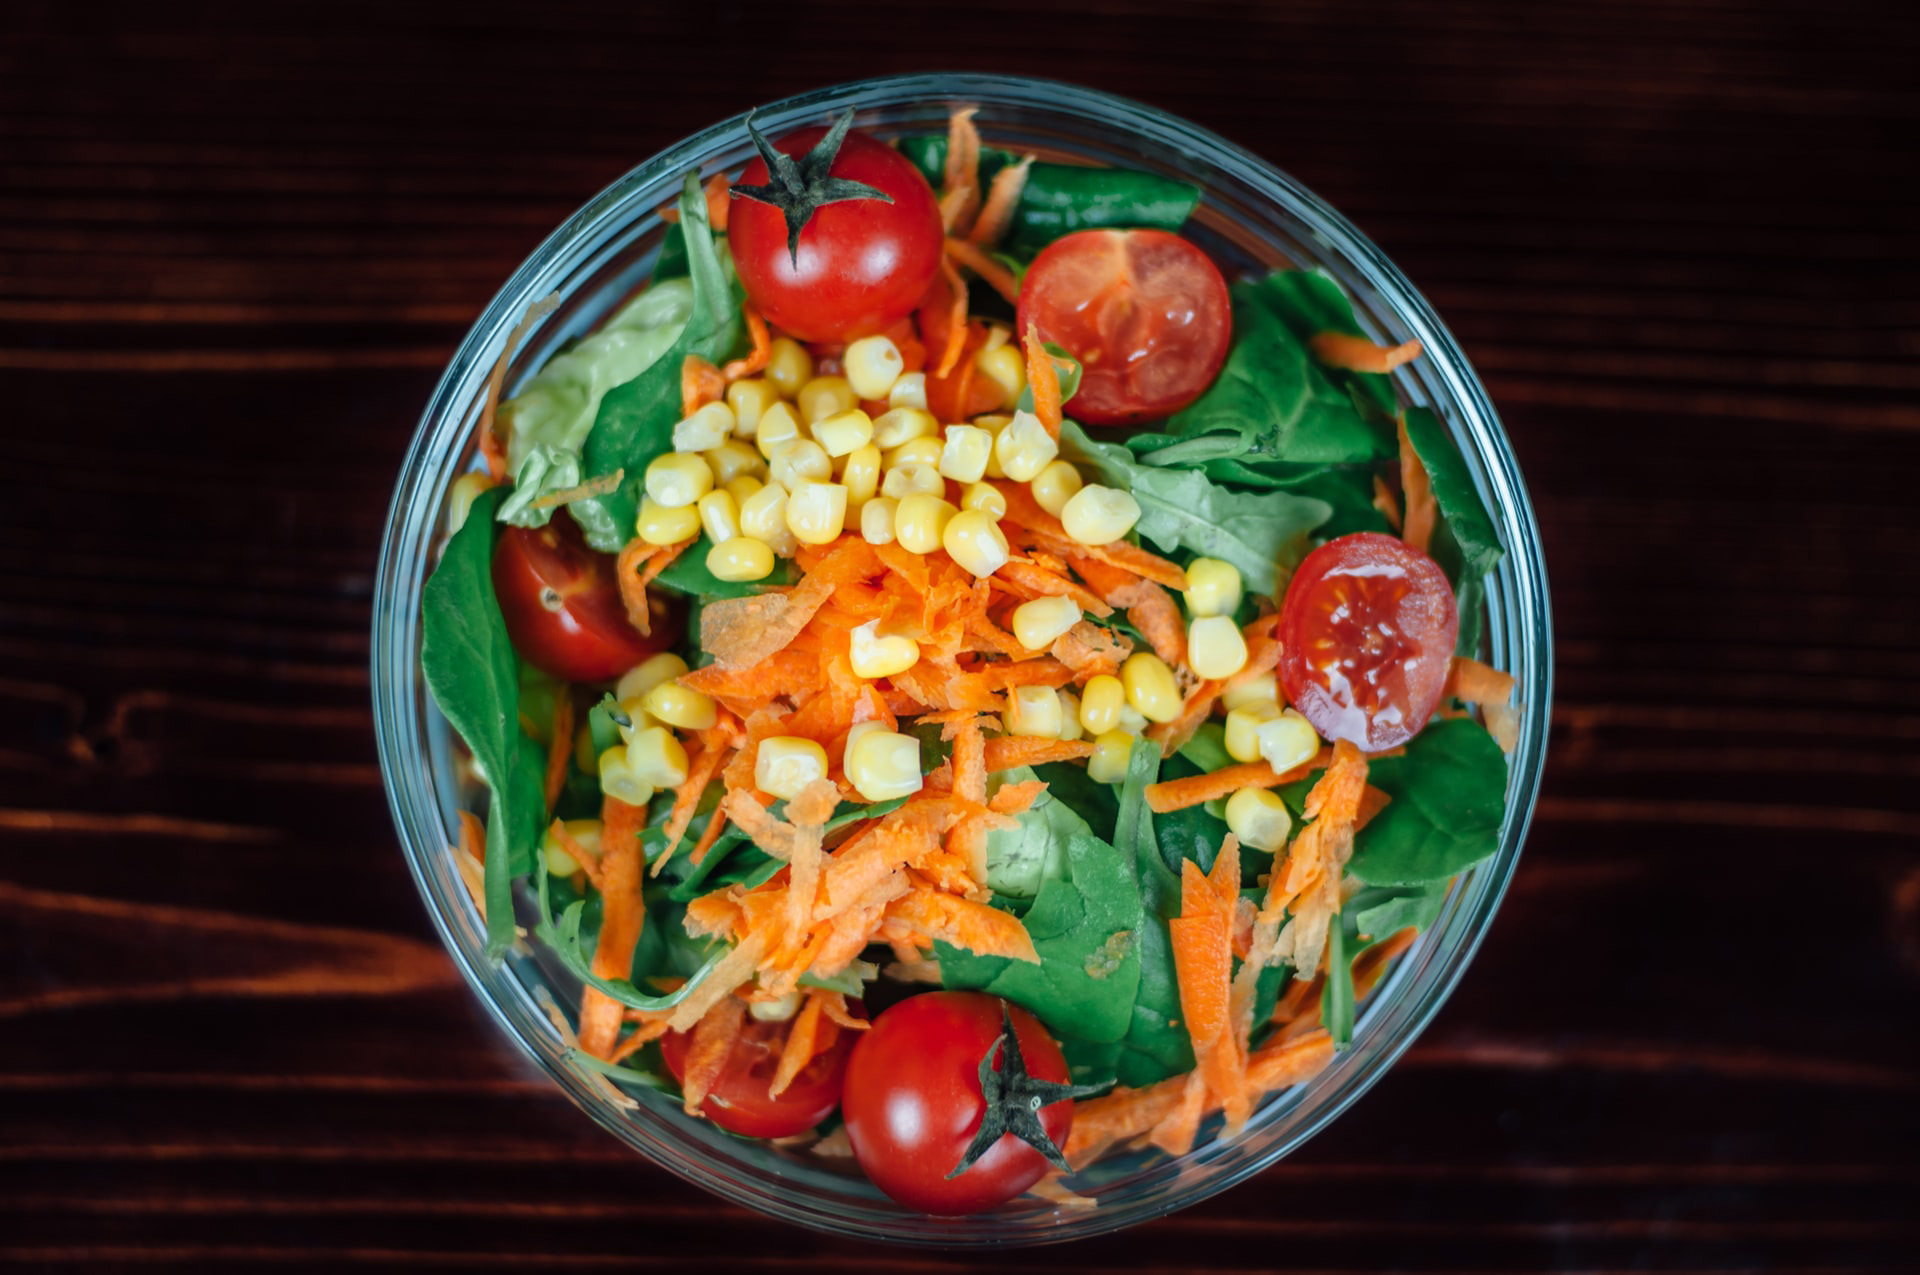 A corn salad in a bowl with greens, tomatoes and shredded carrots.